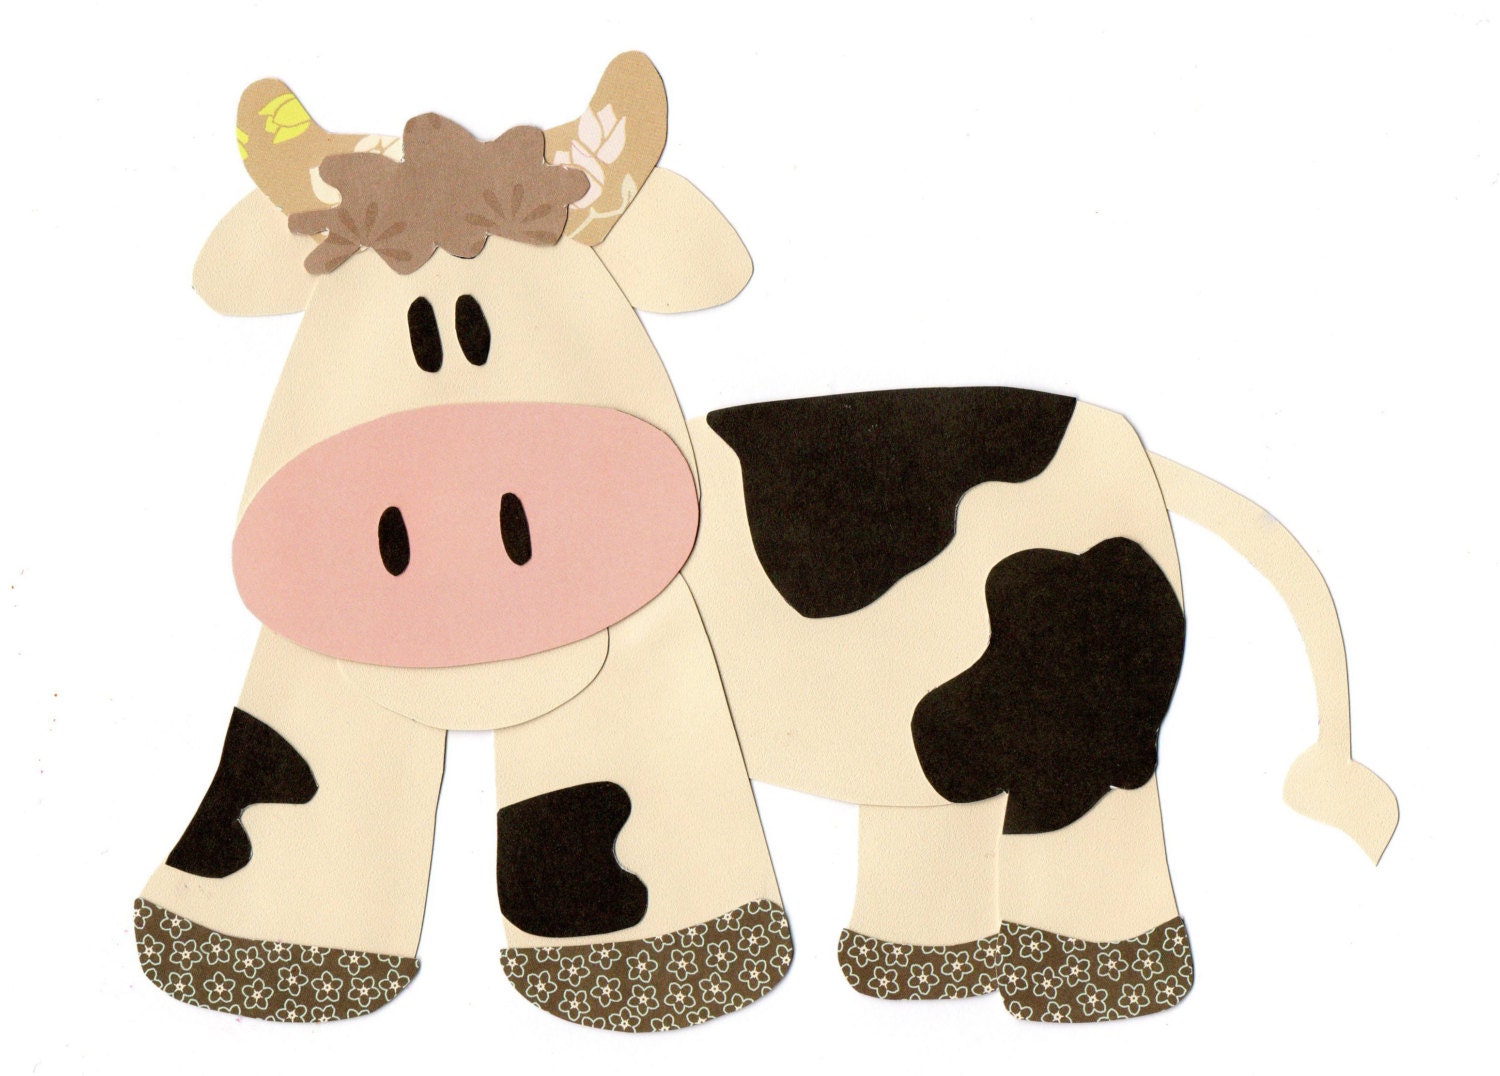 Applique Template Farm Animal Cow By ForgetMeNotByMarie On Etsy